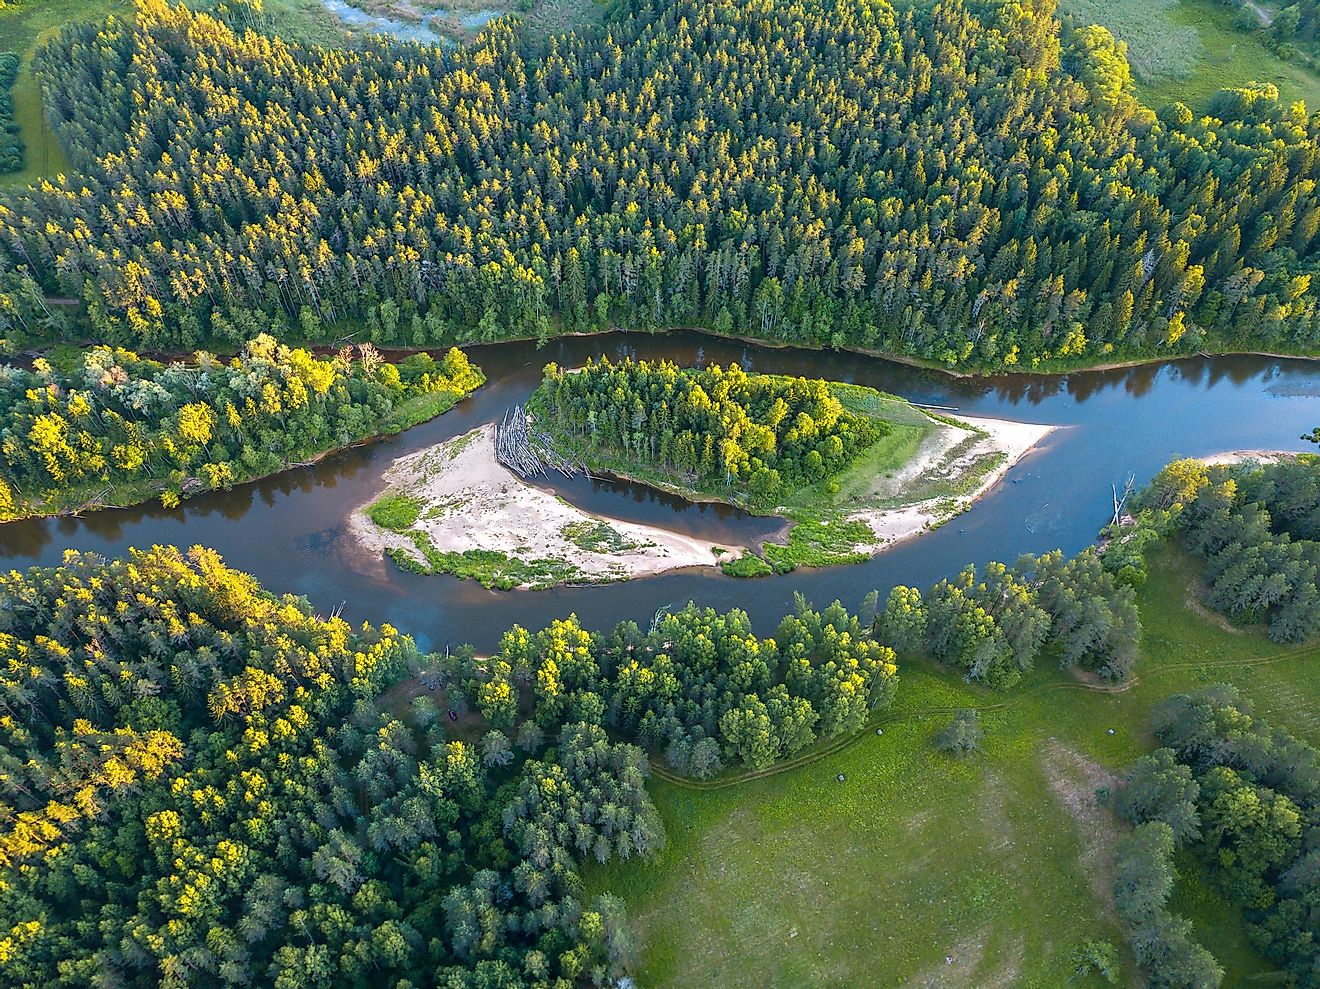 The scenic landscape of the Gauja River and surrounding forests in Latvia.